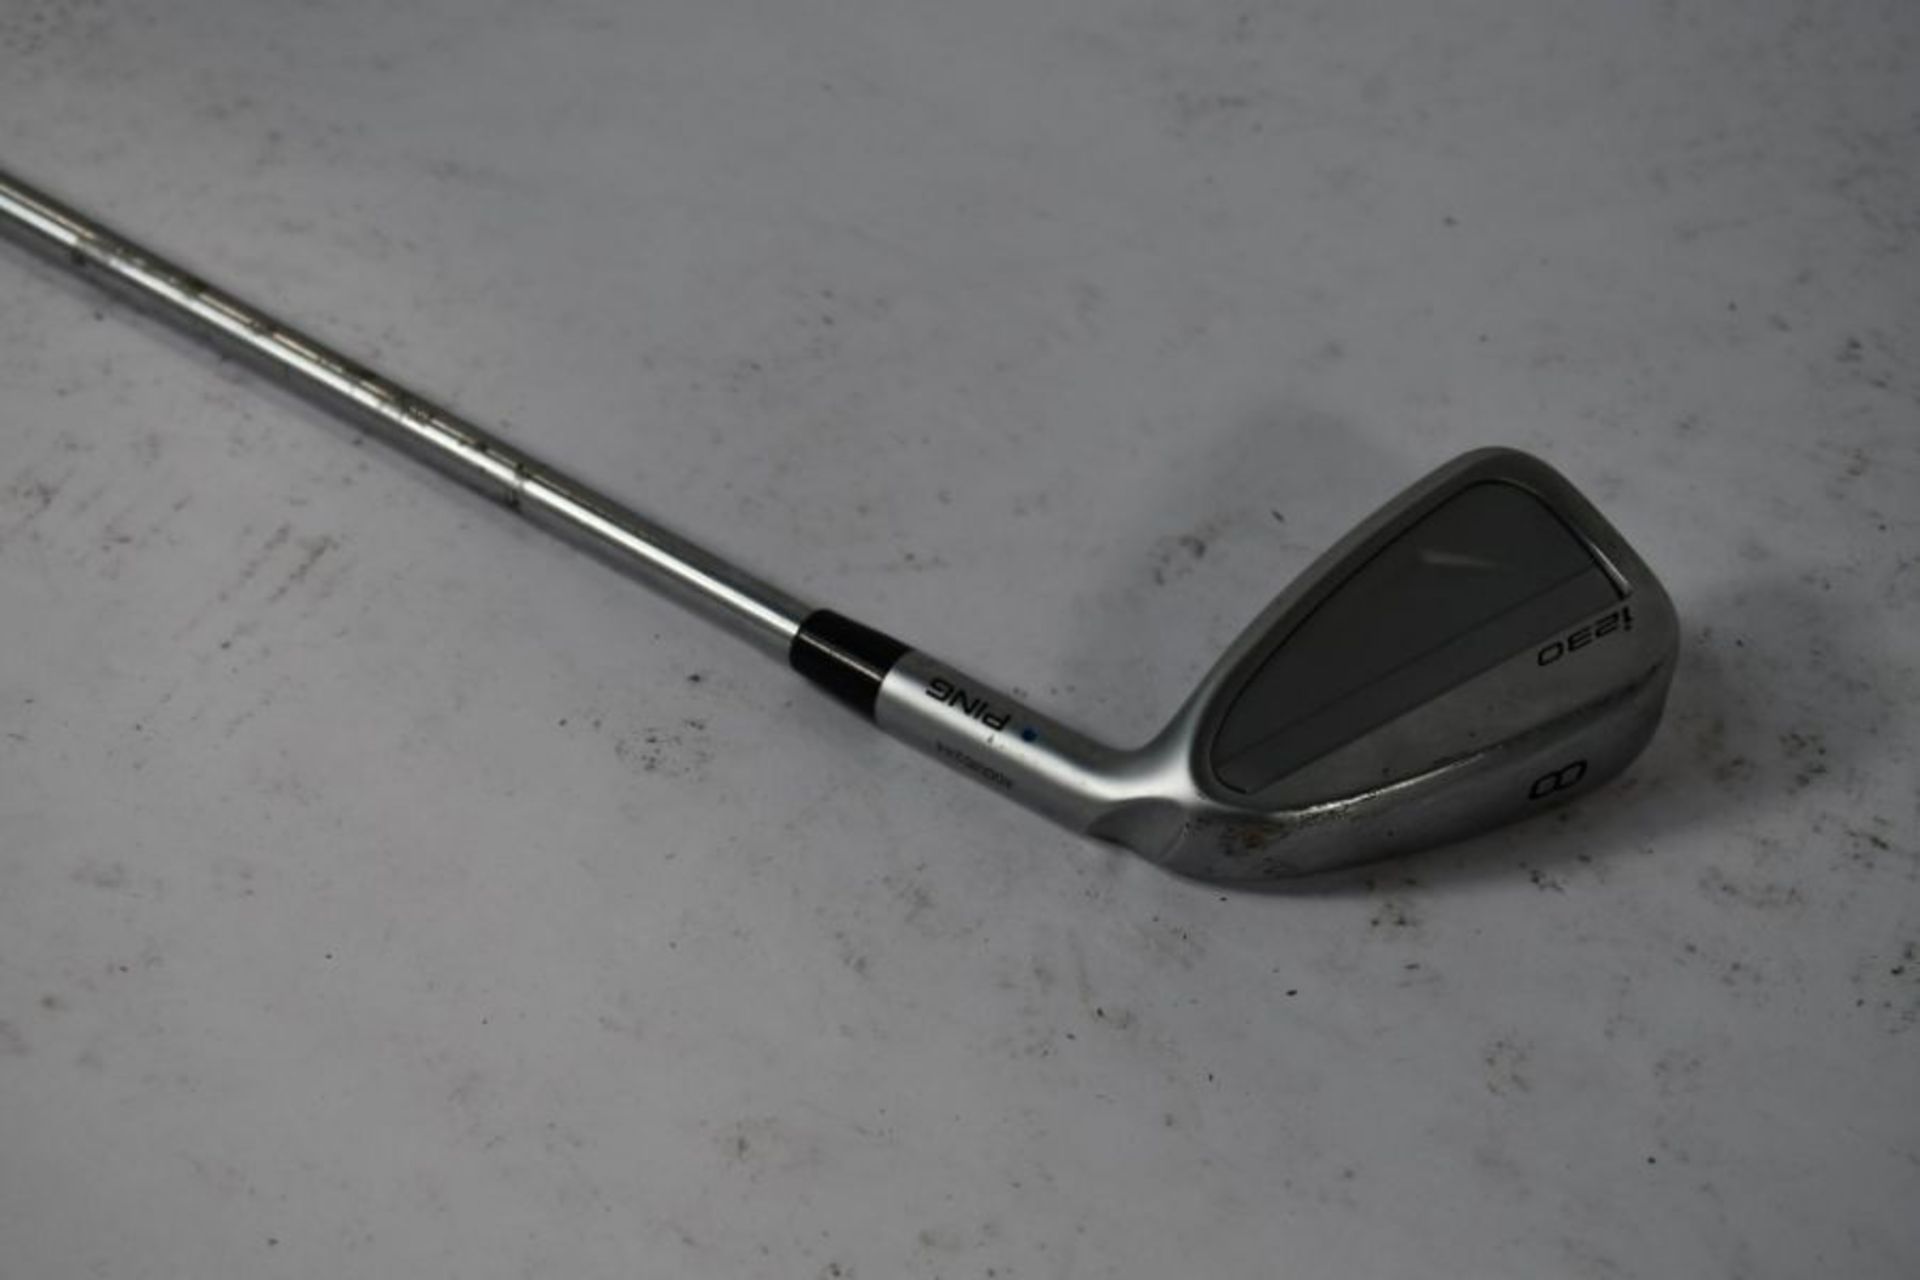 A pre-owned Ping i230 golf club (8 iron)